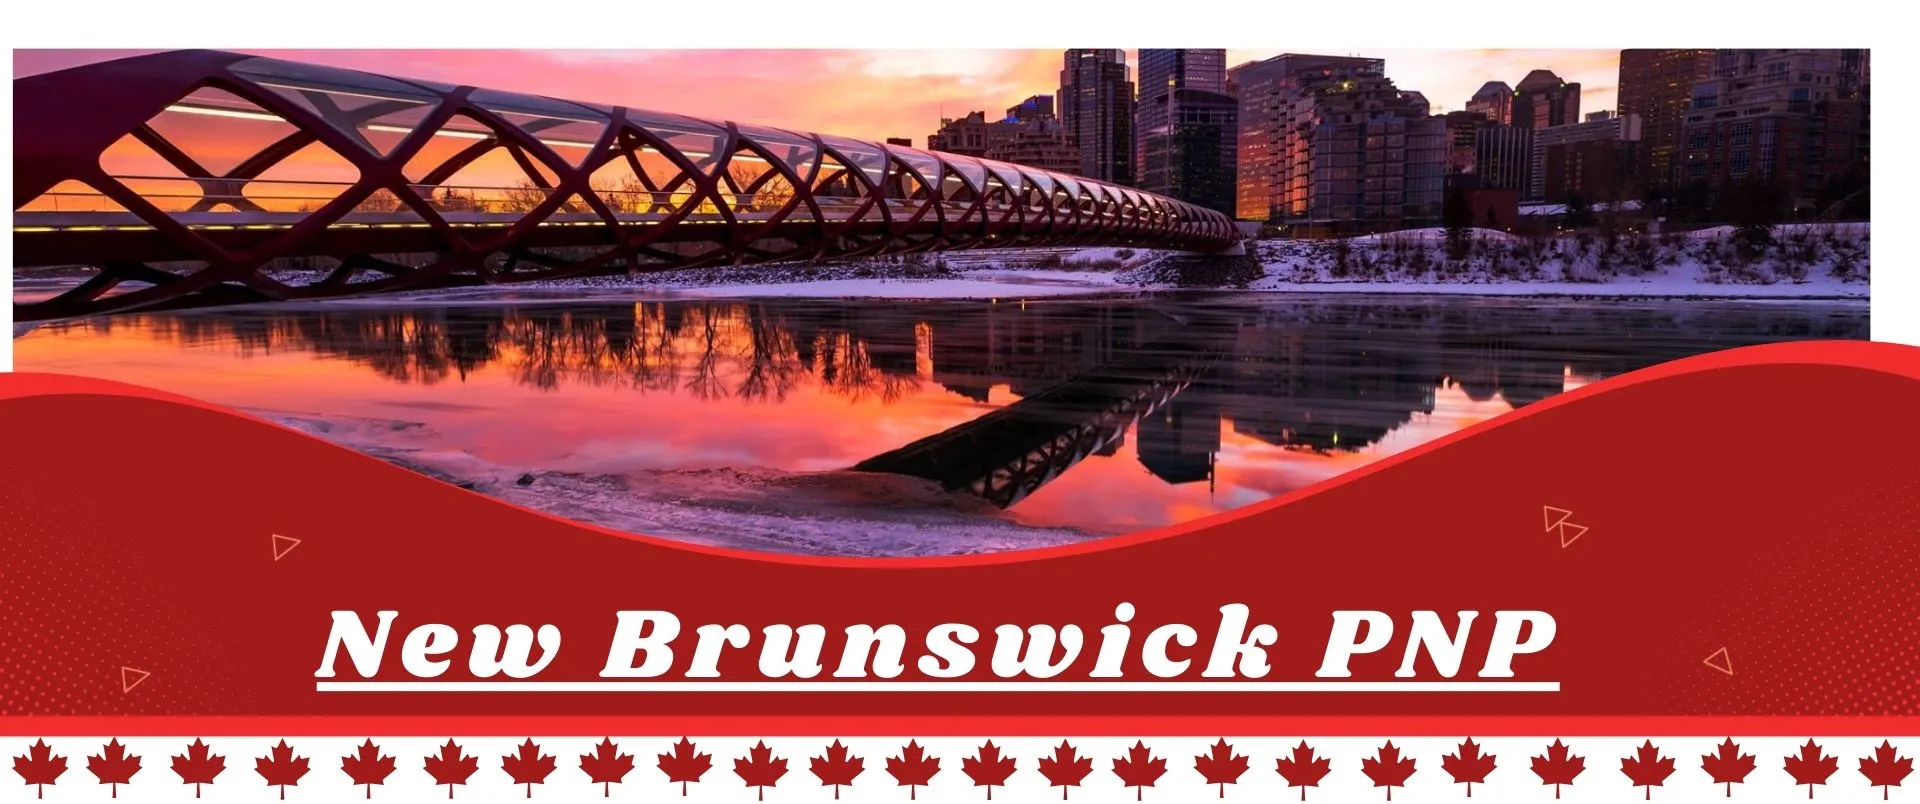 New Brunswick PNP Bridge with Reflection of evening time created by Isha immigration